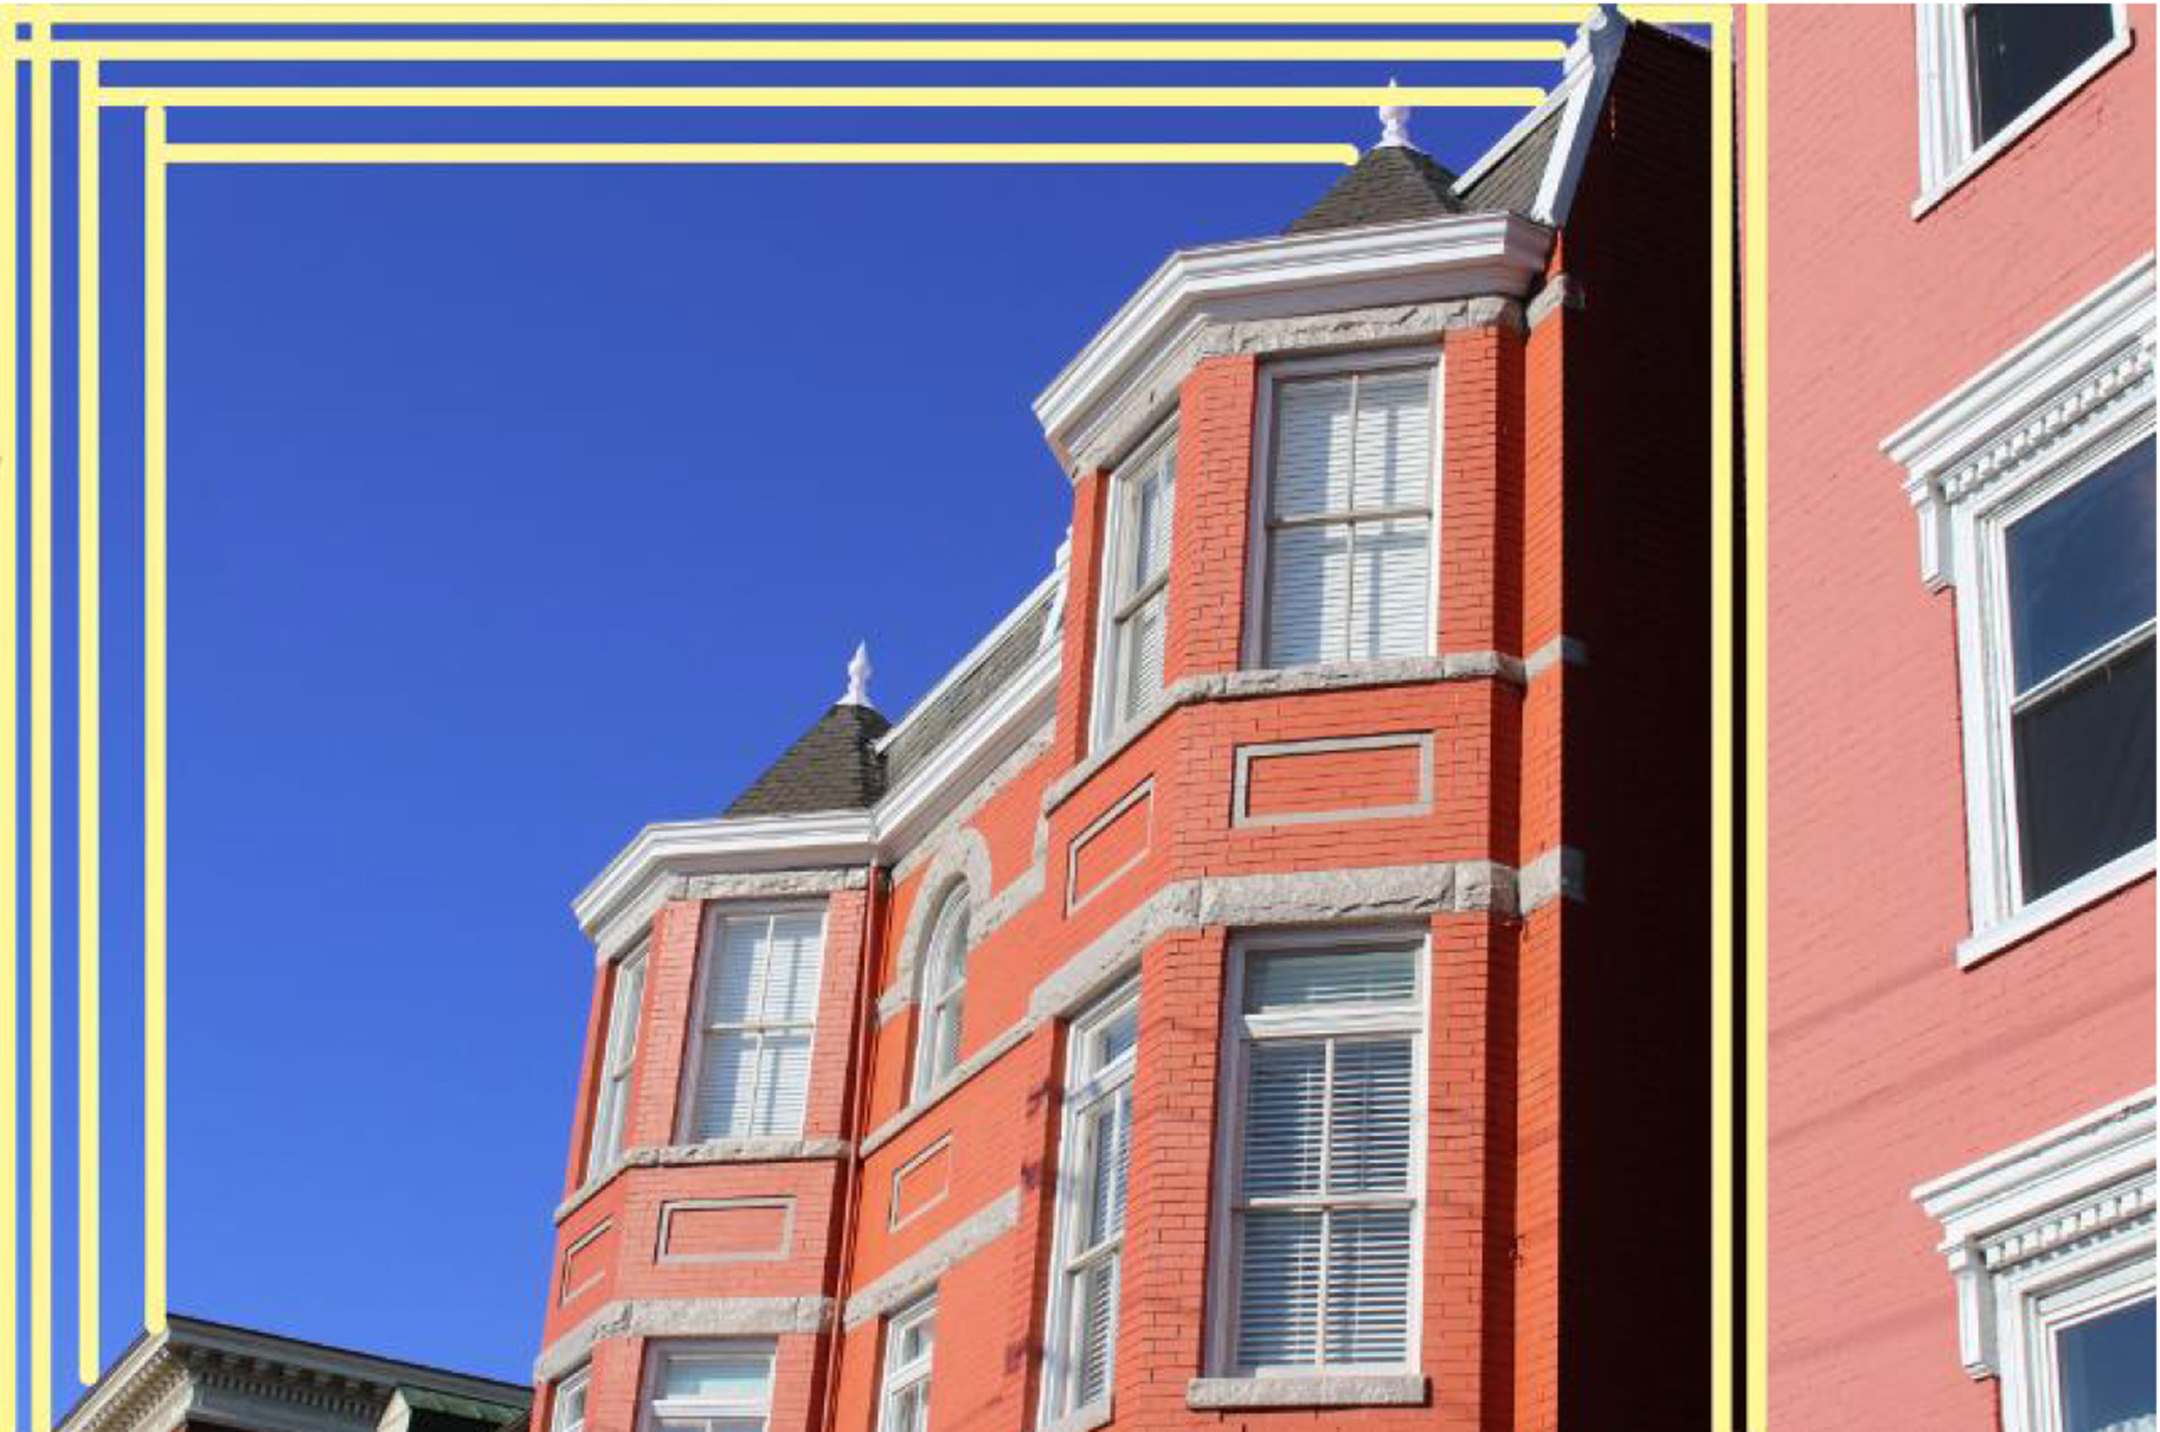 Photo illustration of a red brick home against a blue sky, seen from the ground looking up, with yellow lines bordering the left side of the frame